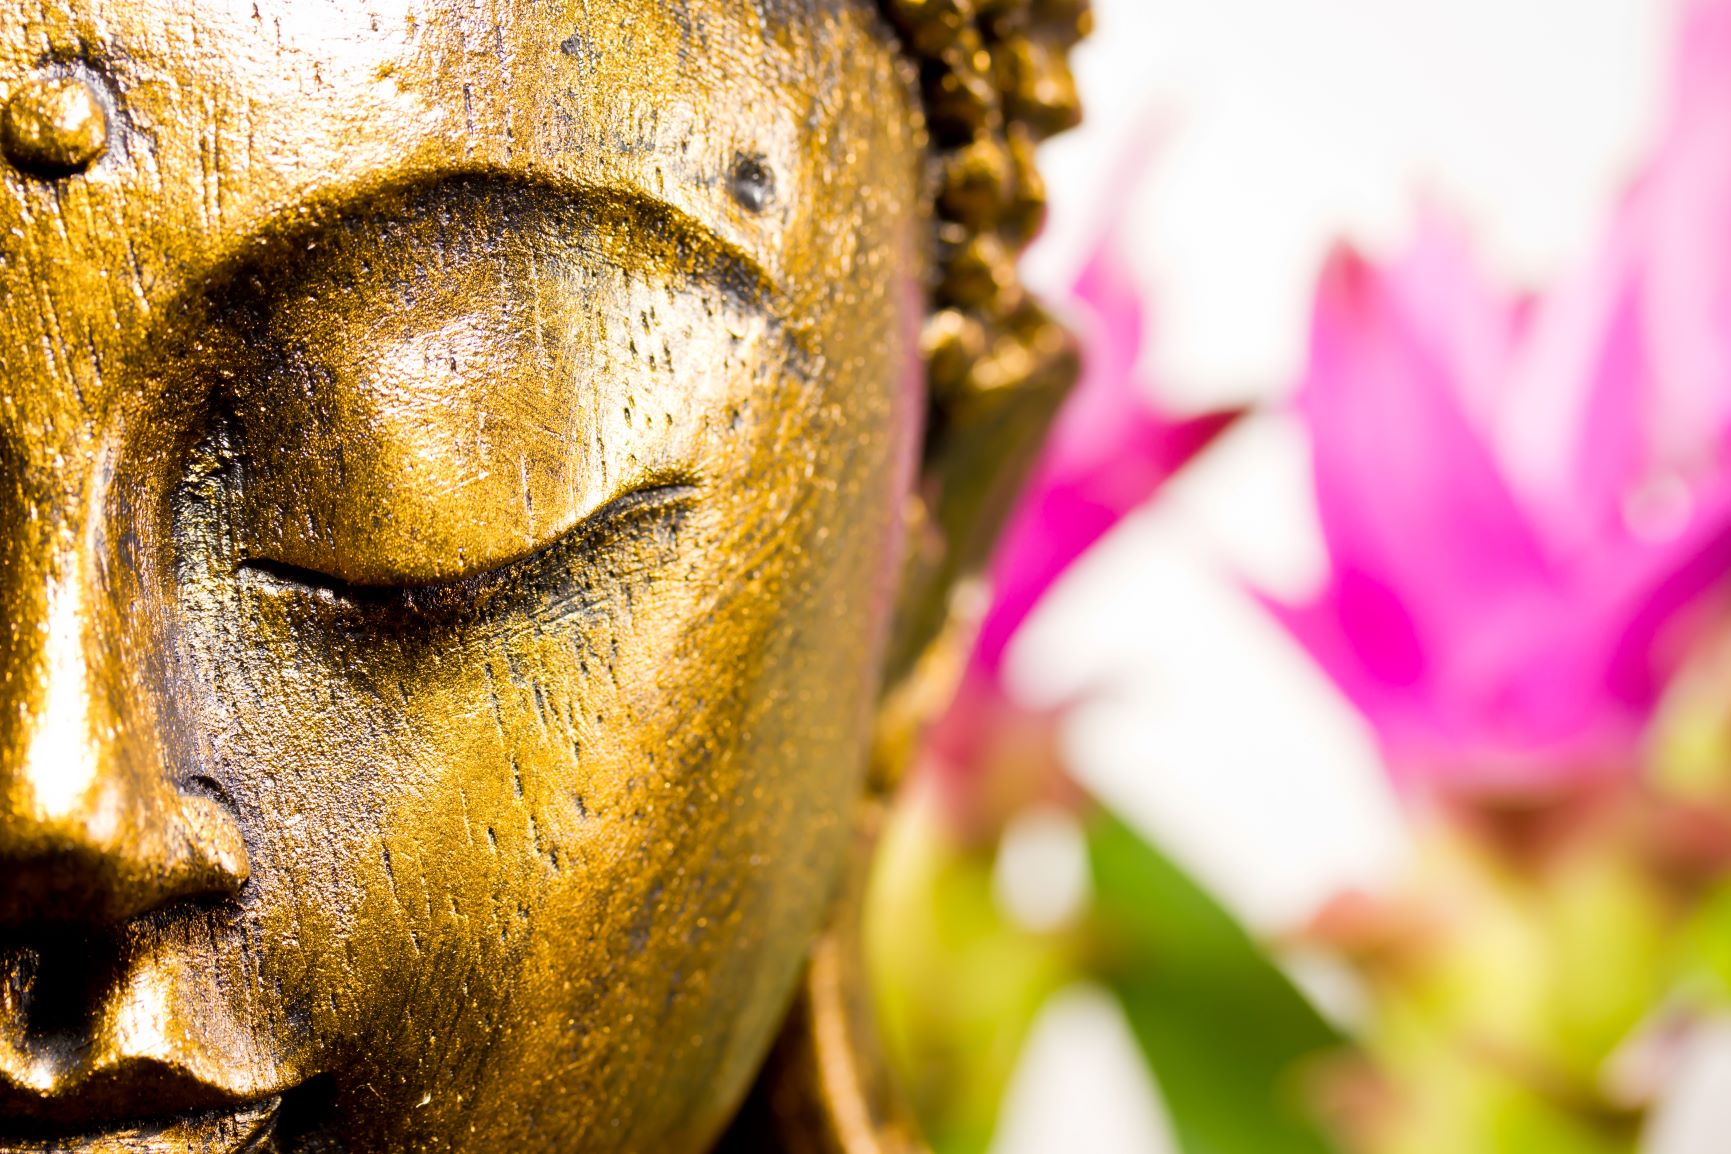 Budha Face with Lotus Flowers in the Background